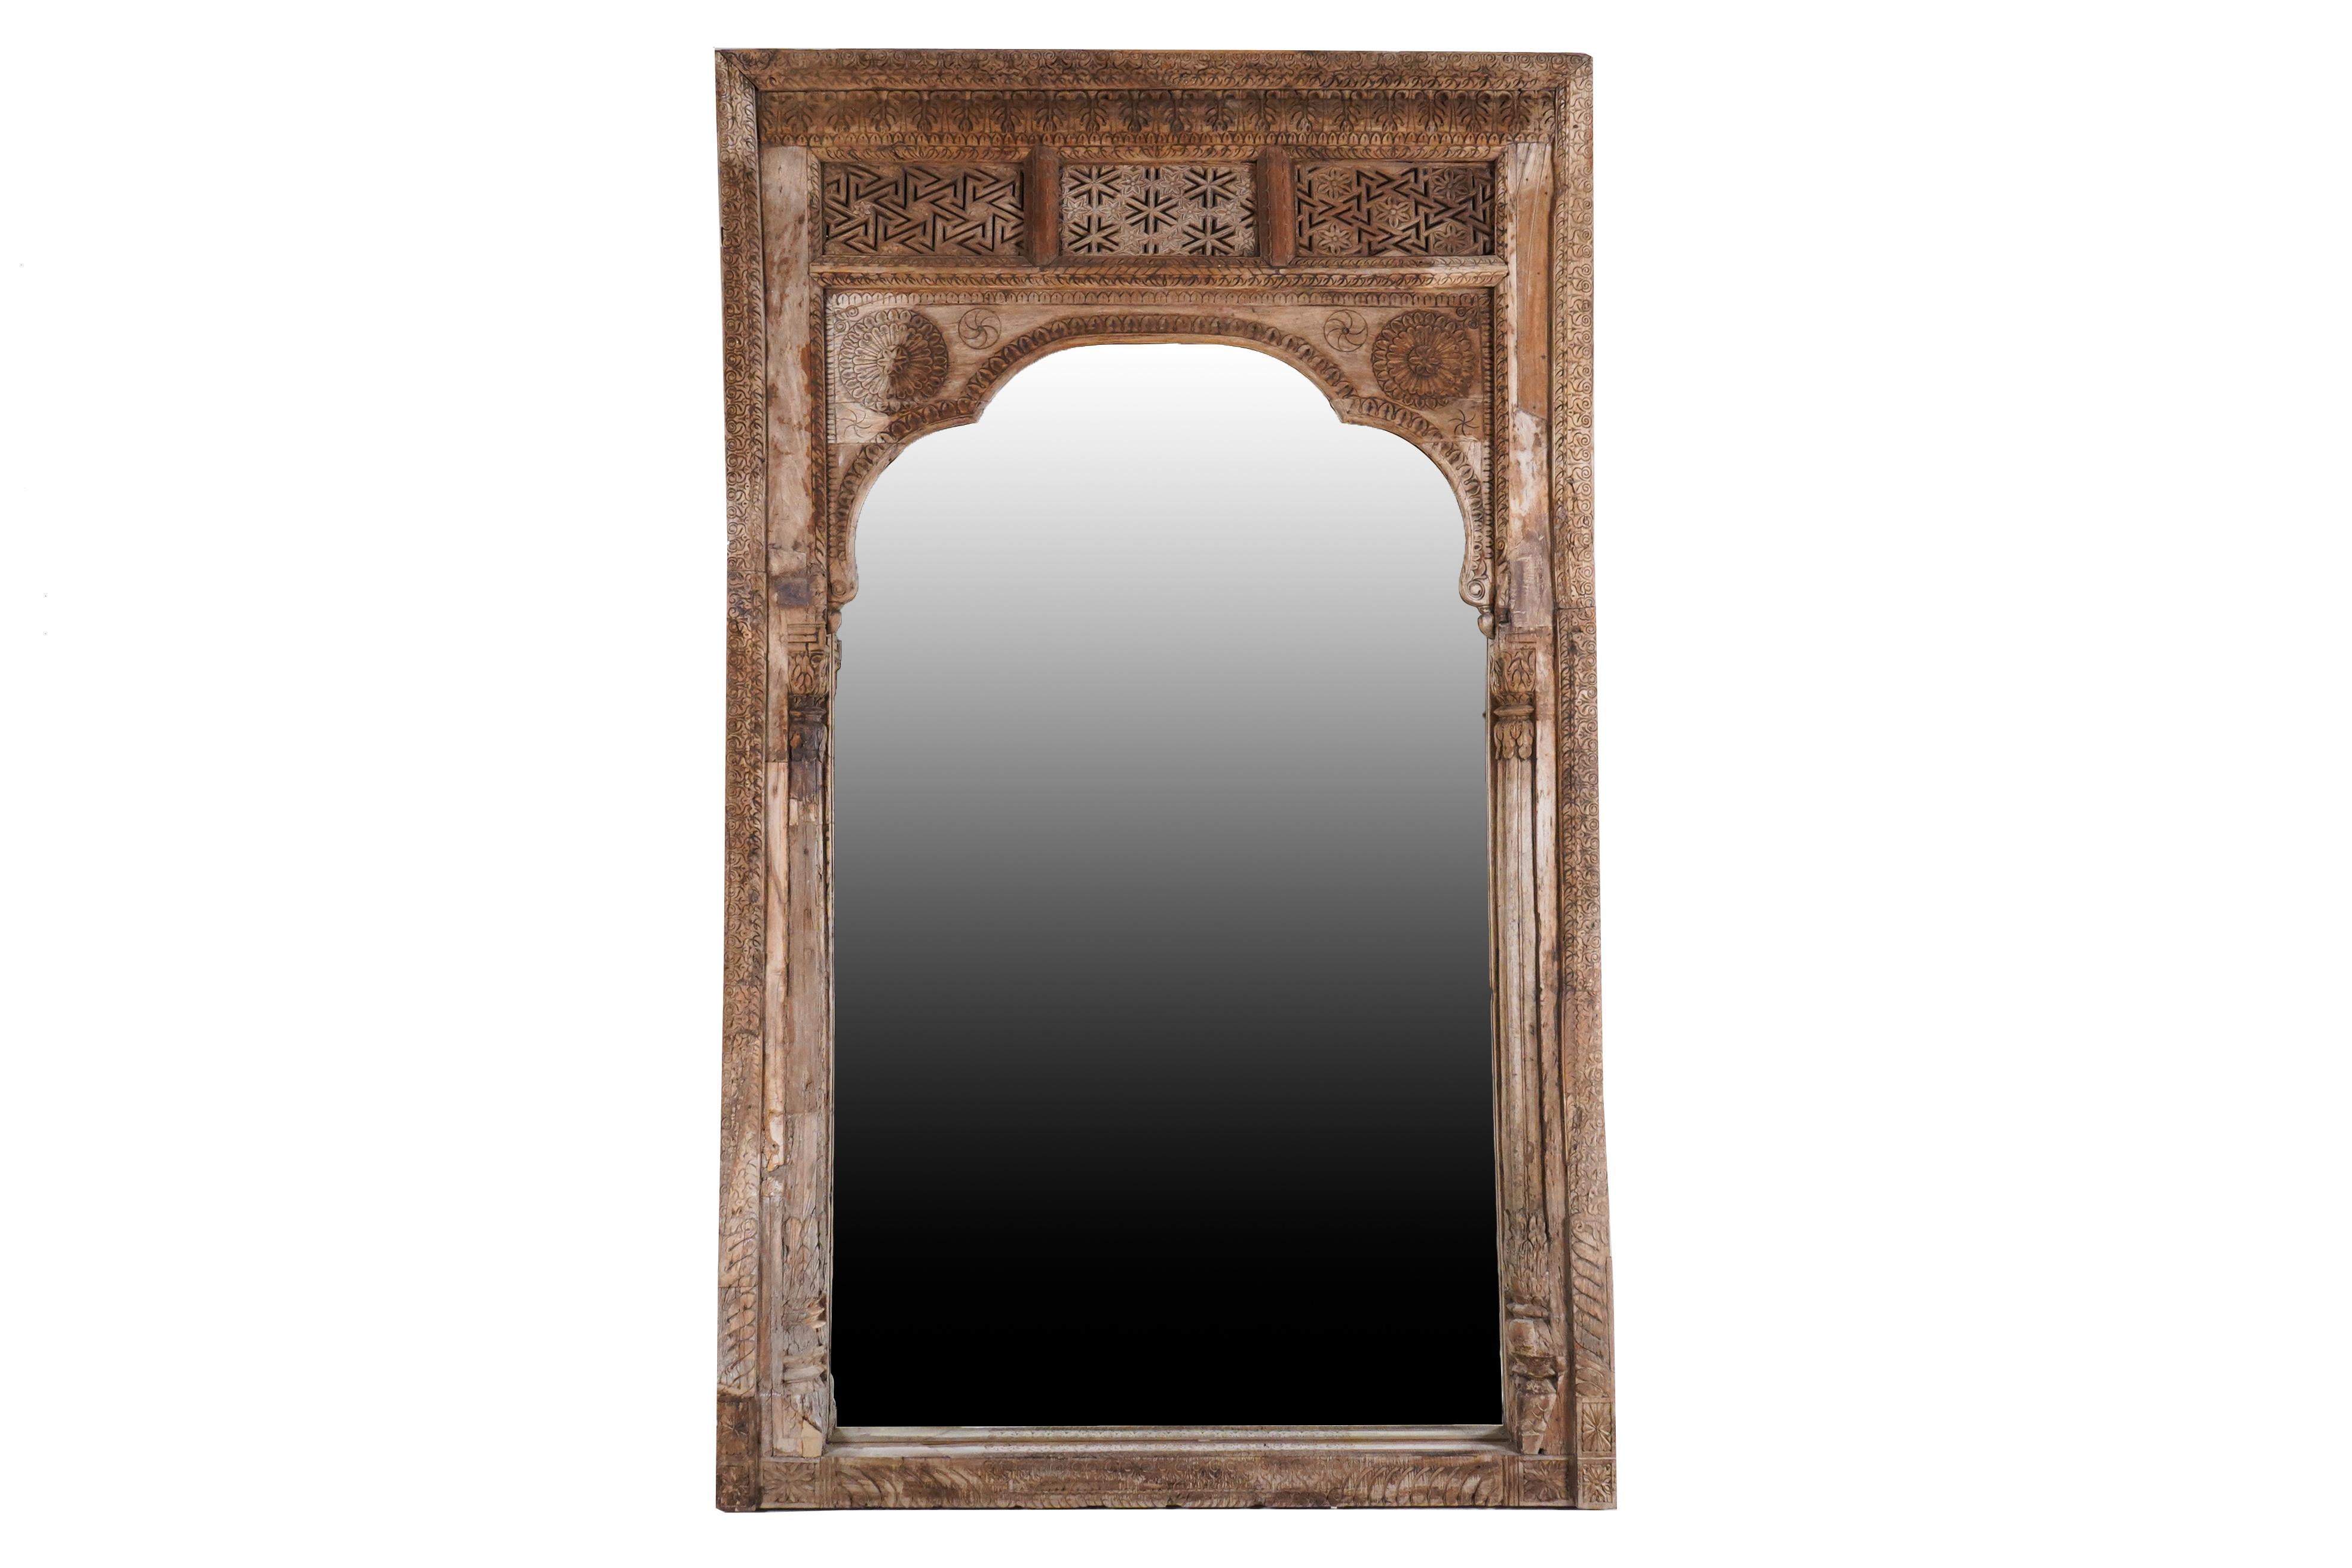 This intricately carved mirror frame was originally a window frame in a magnificent mansion in Gujarat, India. It is made from Sheesham wood and was originally painted. After the mansion was dismantled, all the valuable wooden decorations